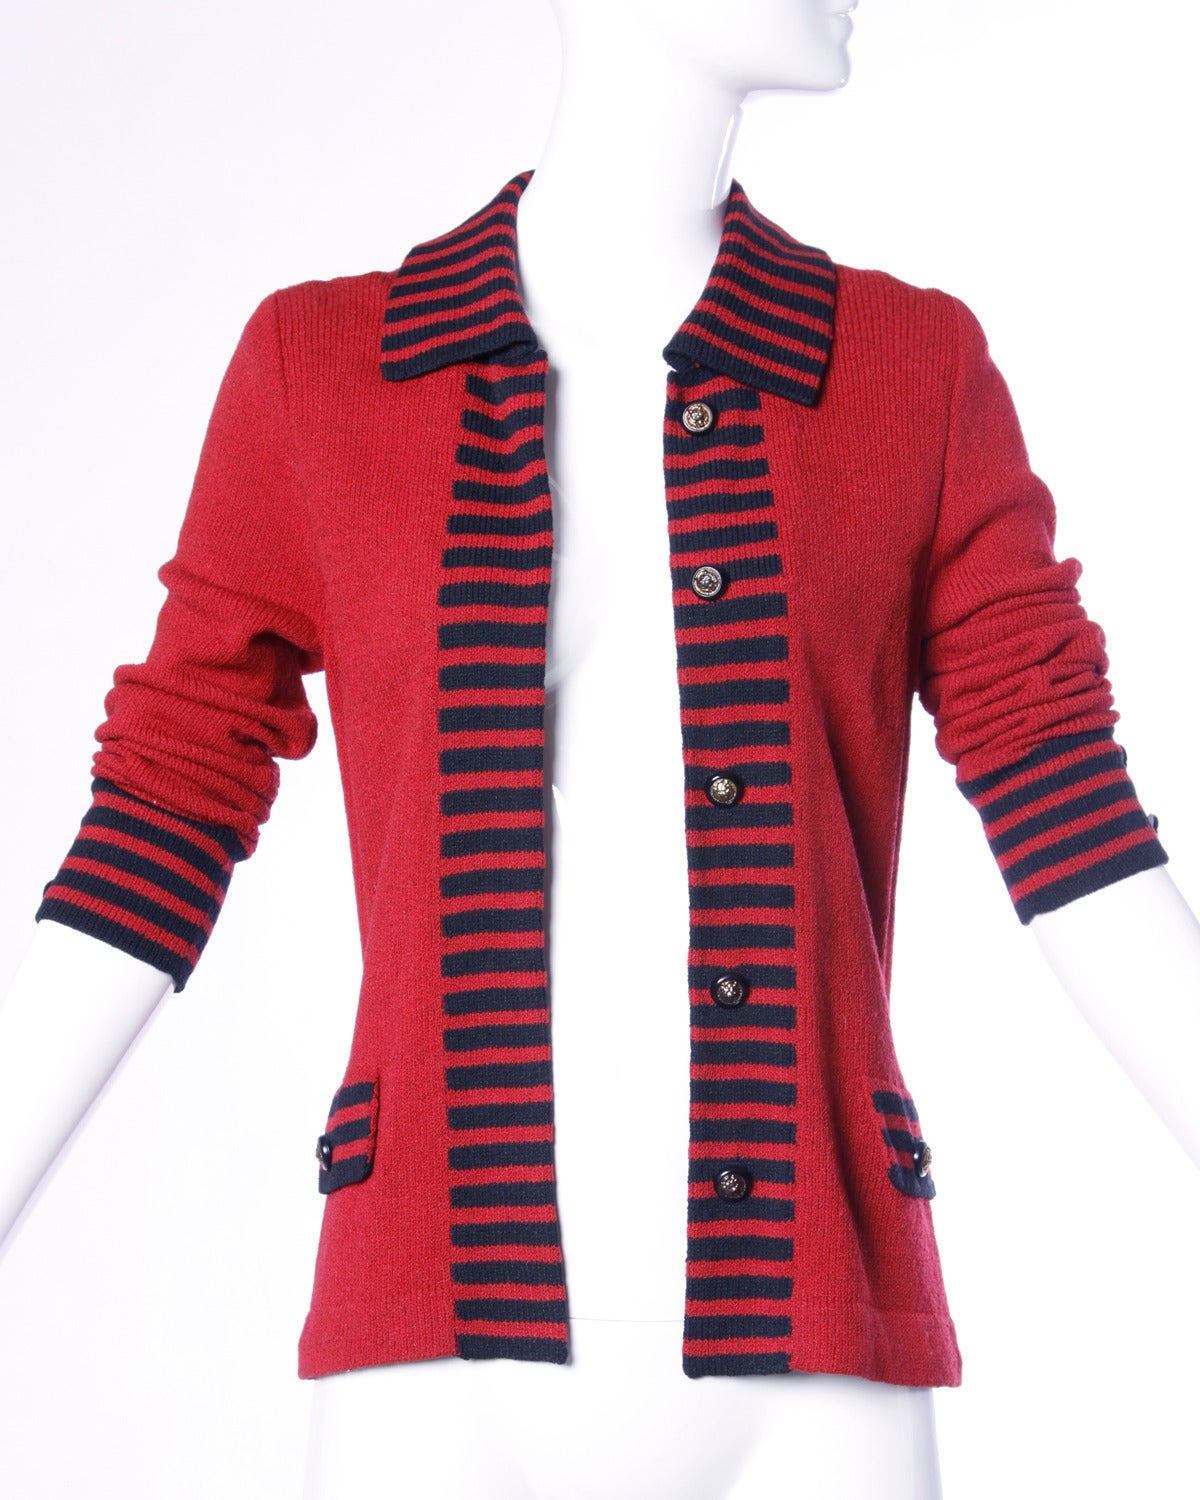 Adolfo Vintage Red and Black Striped Knit Cardigan Sweater or Suit ...